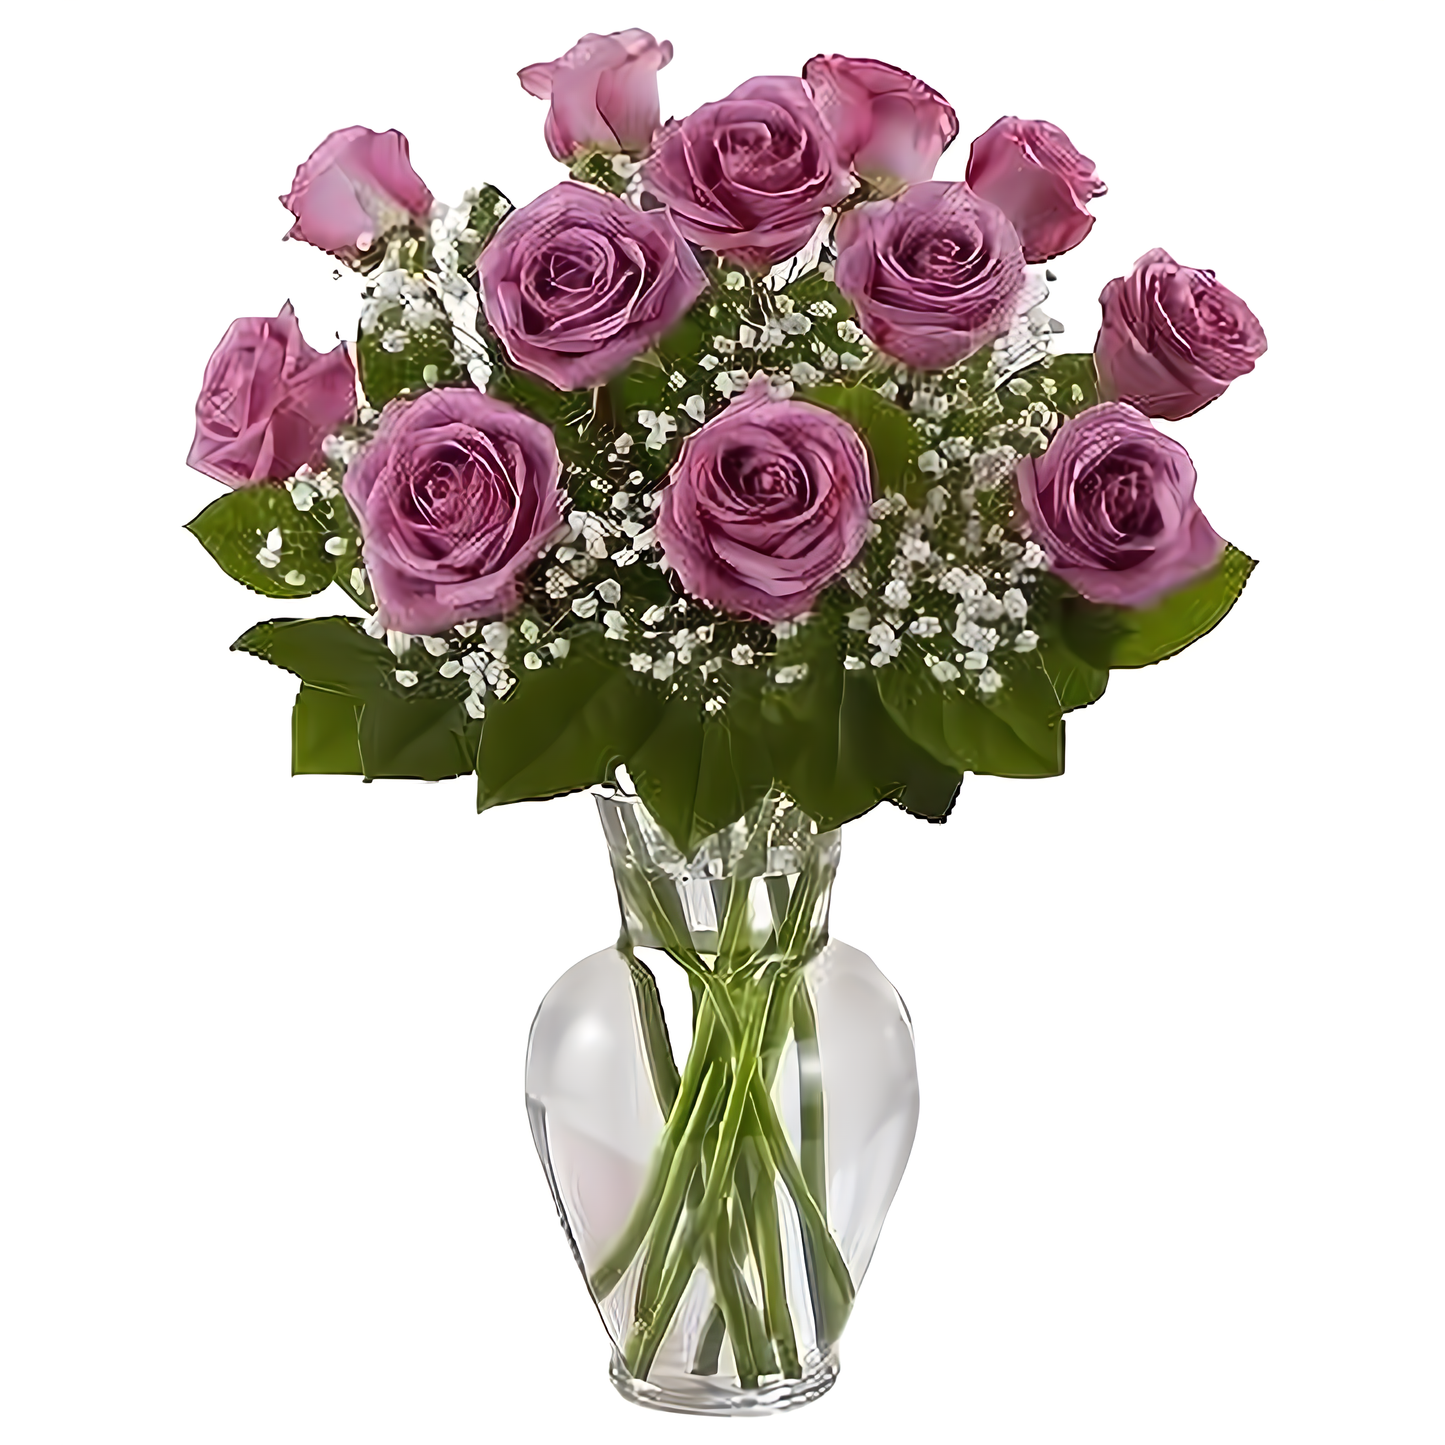 NYC Flower Delivery - Premium Long Stem Purple Roses - Roses